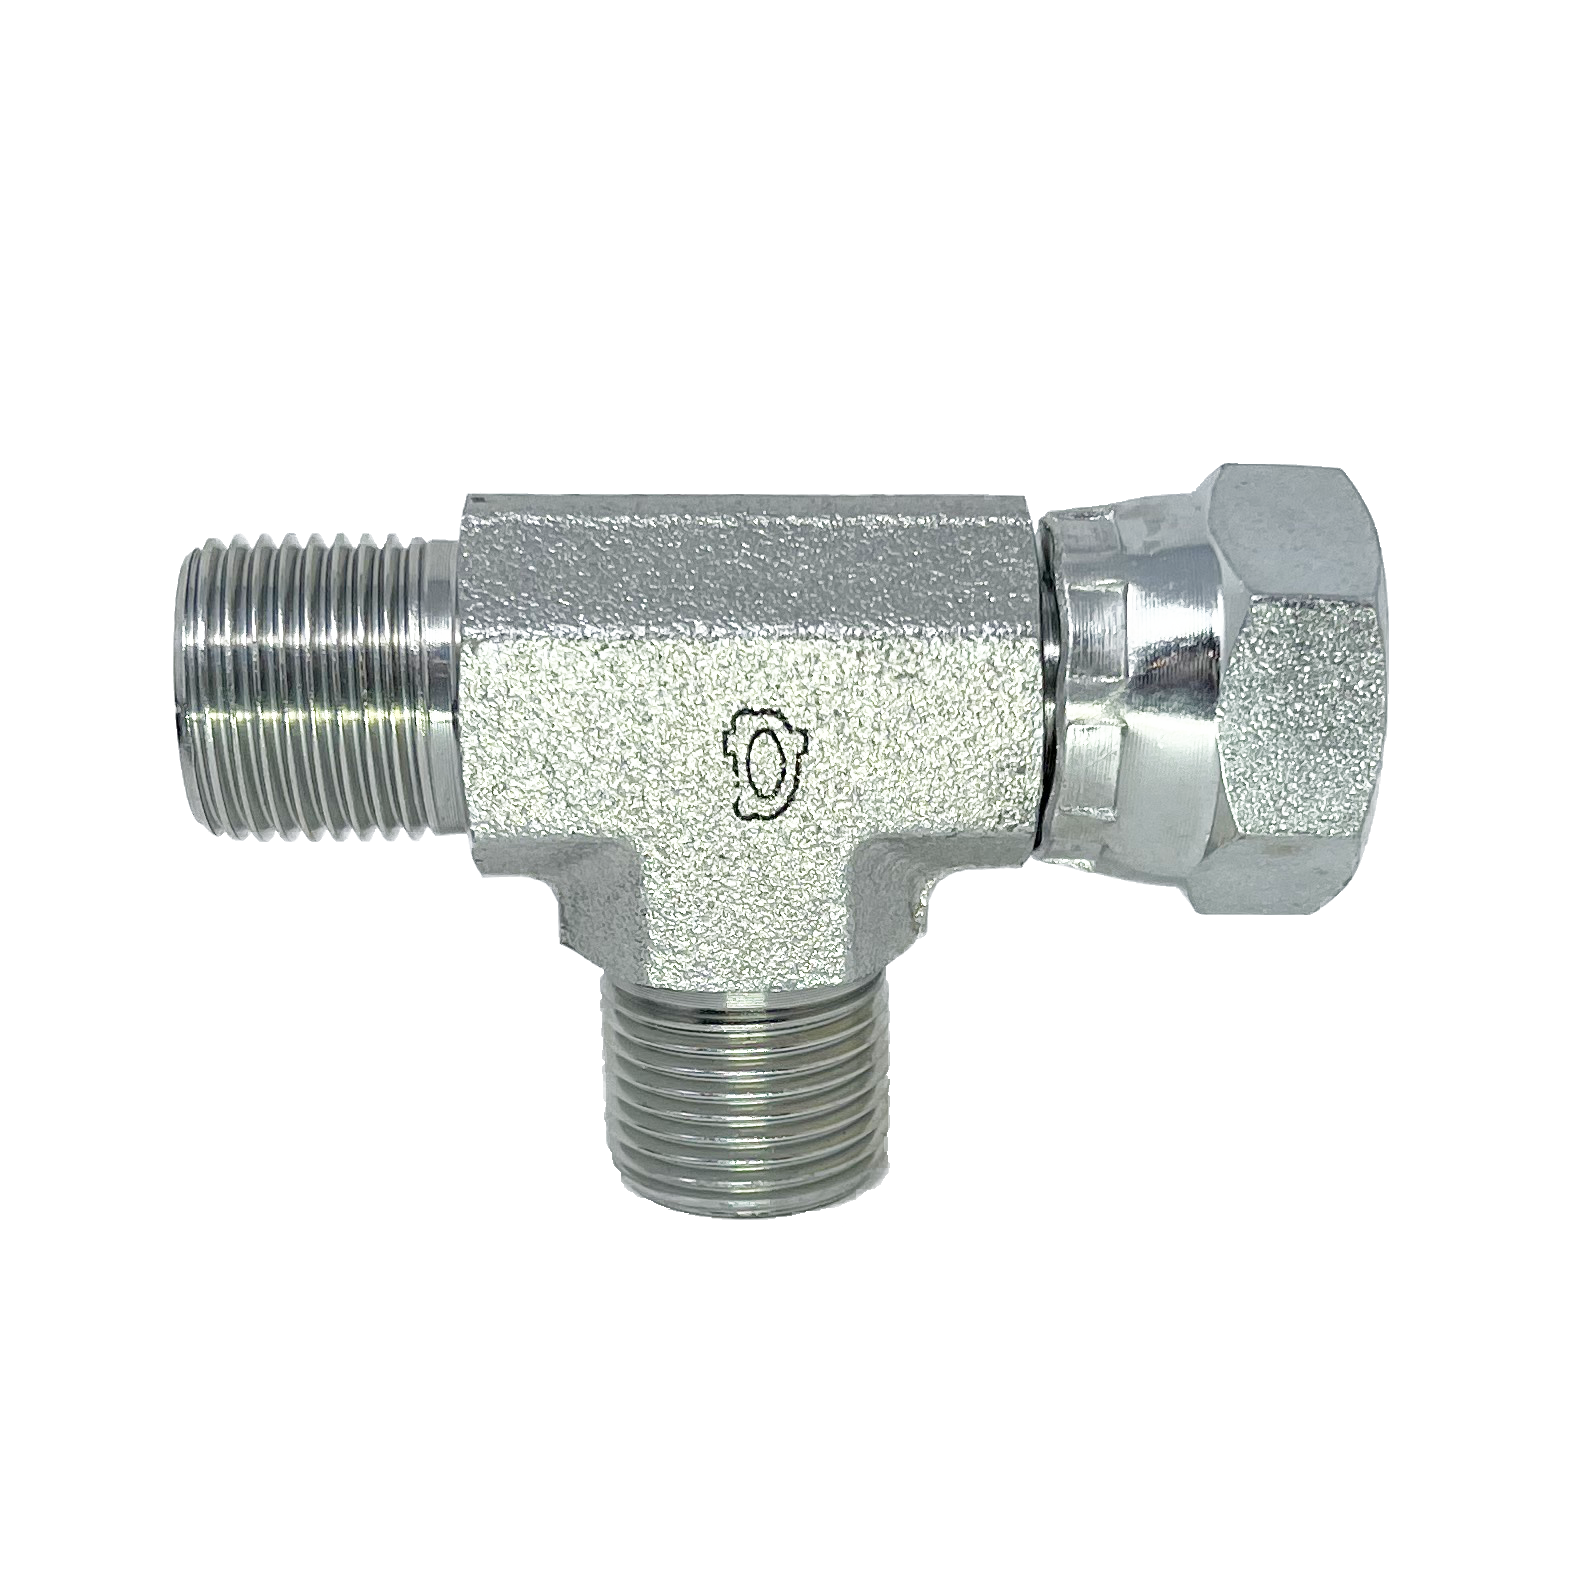 9090-20-20-20 : Adaptall Tee Adapter, Male 1.25 (1-1/4") BSPP x Female 1.25 (1-1/4") BSPP x Male 1.25 (1-1/4") BSPP, Carbon Steel